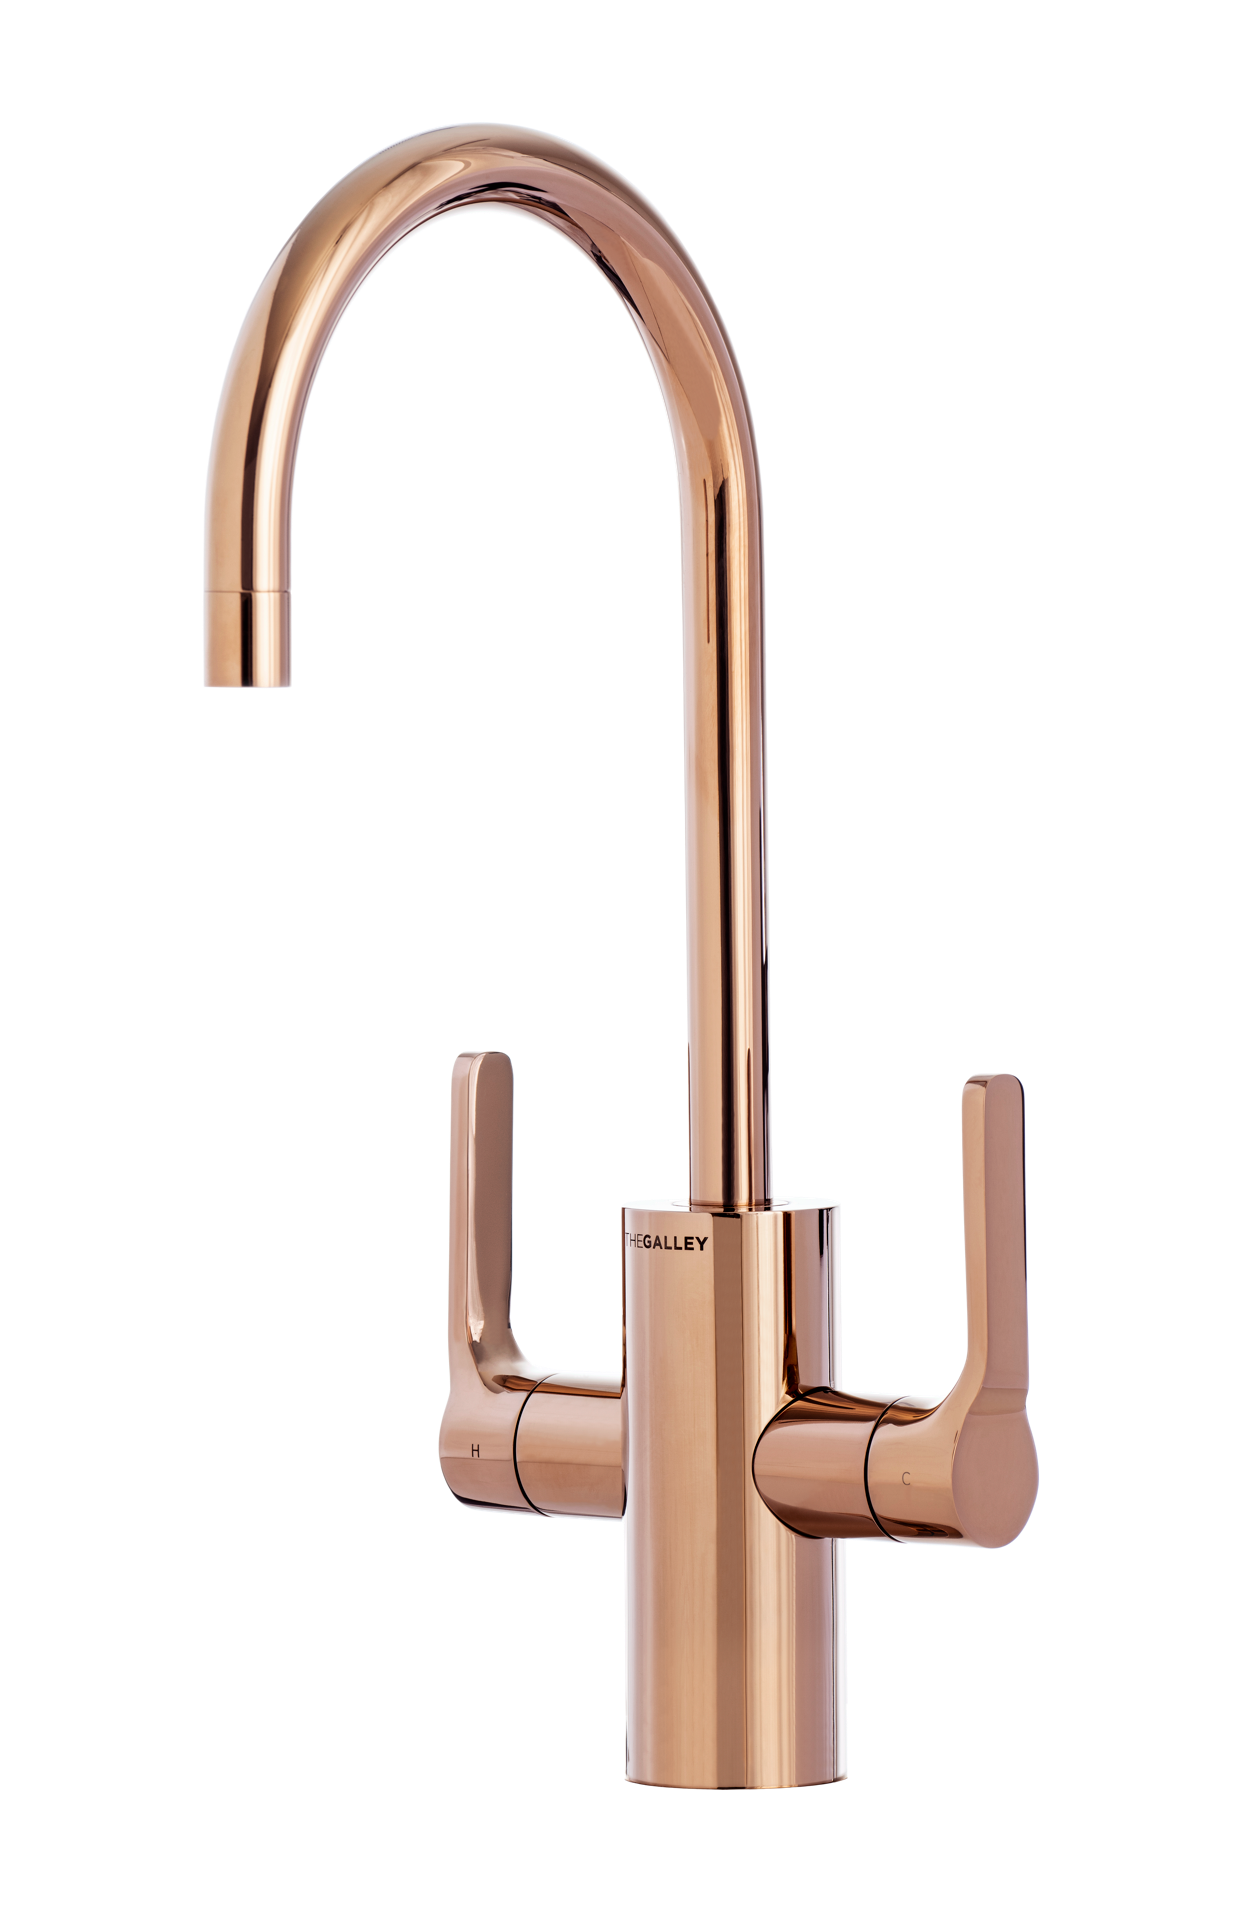 The Galley Ideal Hot and Cold Tap with Ideal Digital Hot Water Tank and Water Filtration System